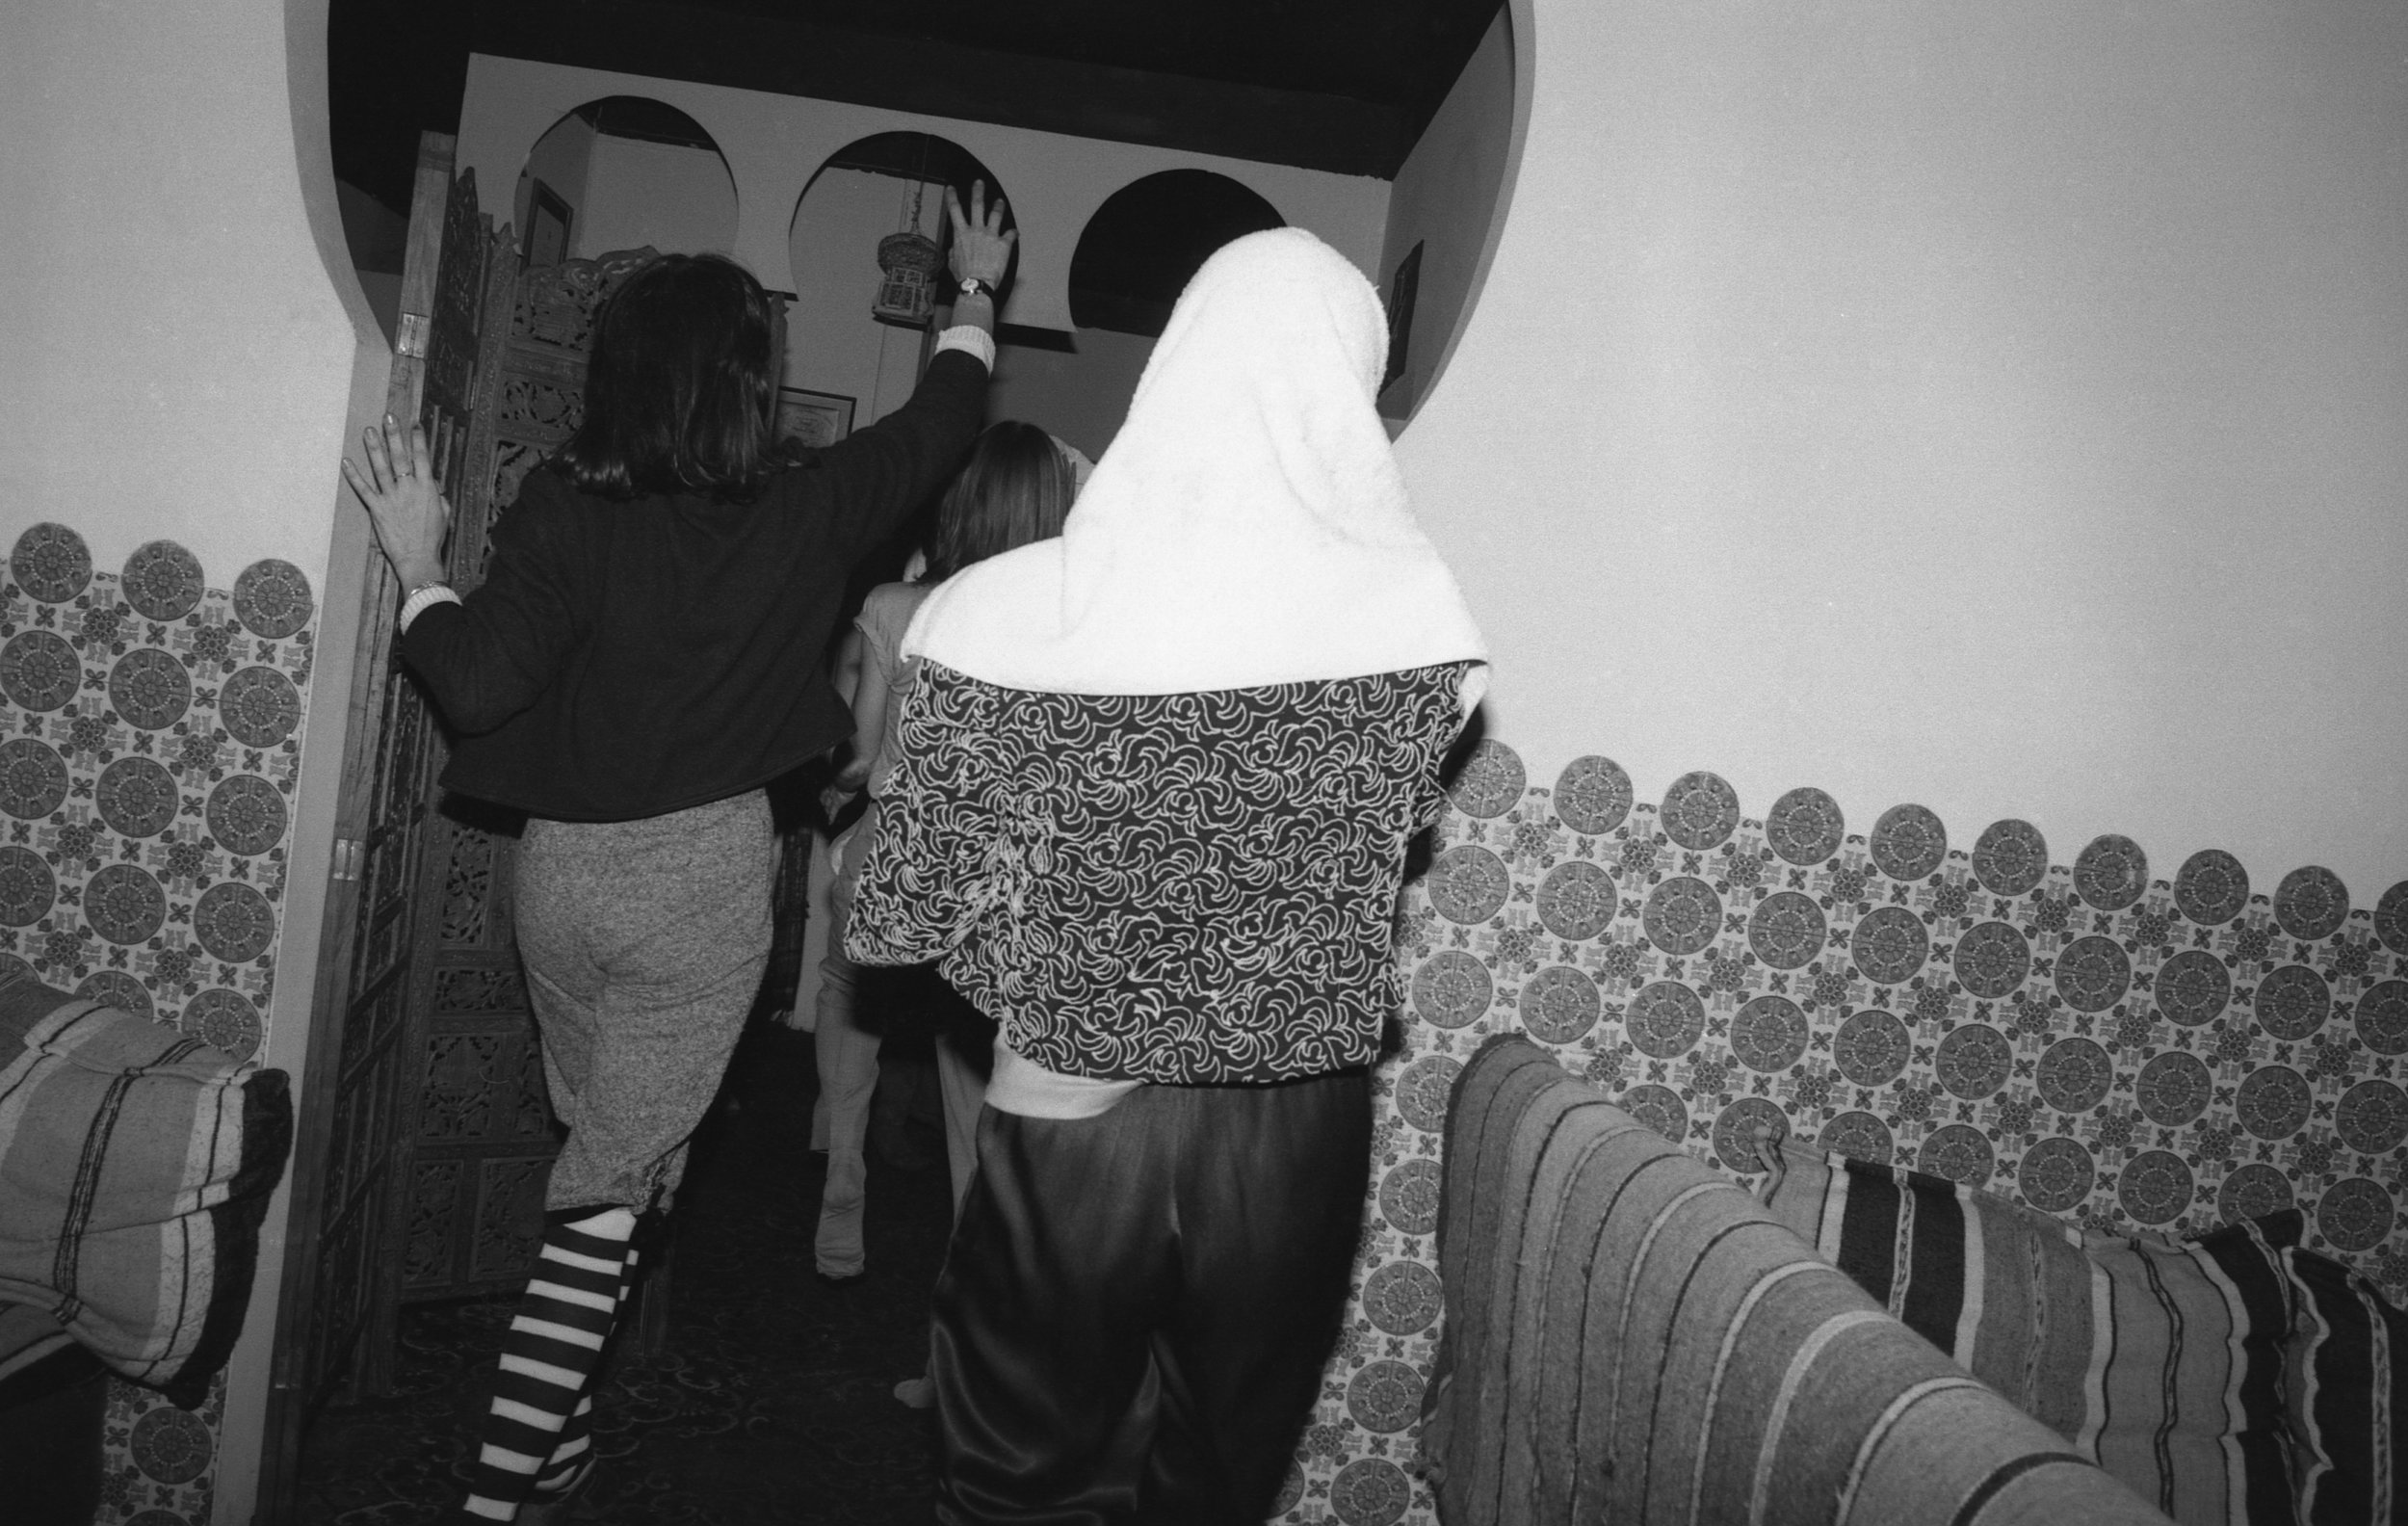 Moroccan Restaurant: Girls' Night Out. Los Angeles, 1981 (17/19)